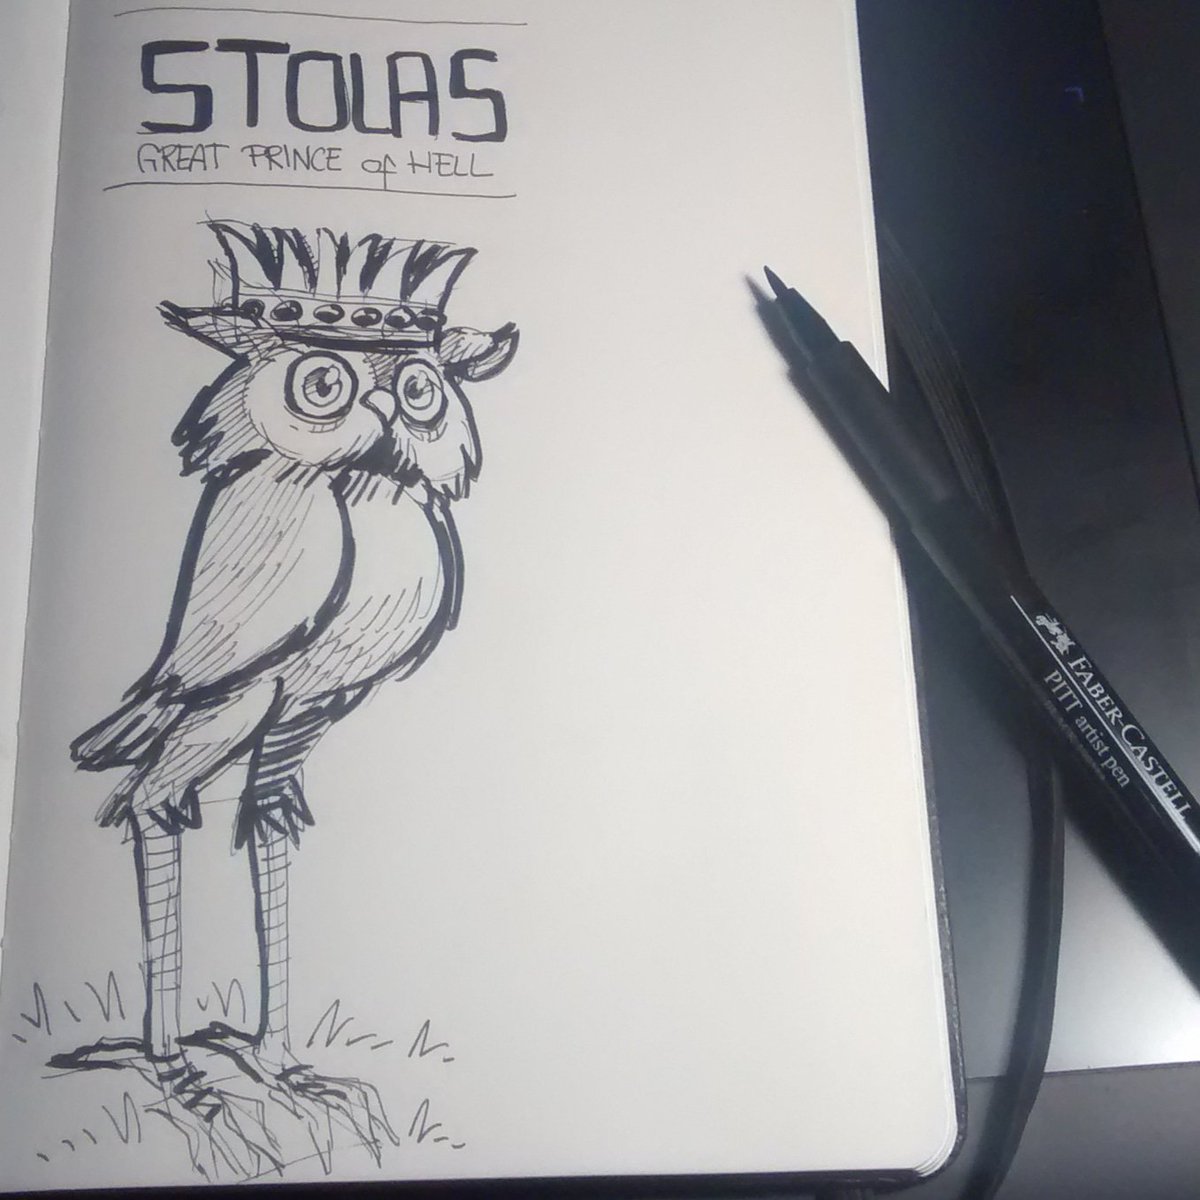 Stolas, Great Prince of Hell (after Louis le Breton) #Stolas #ArsGoetia #DictionnaireInfernal